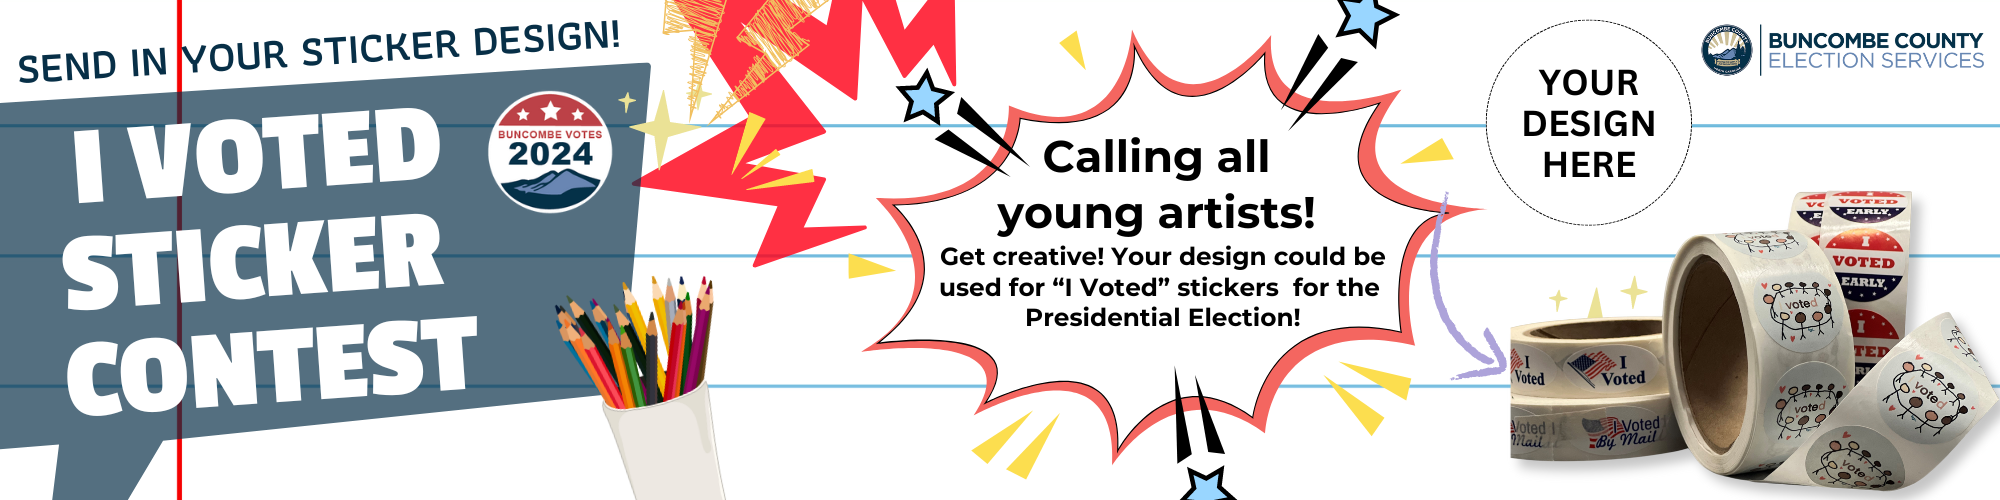 Send in your sticker design! "I Voted" Sticker Contest is now open.